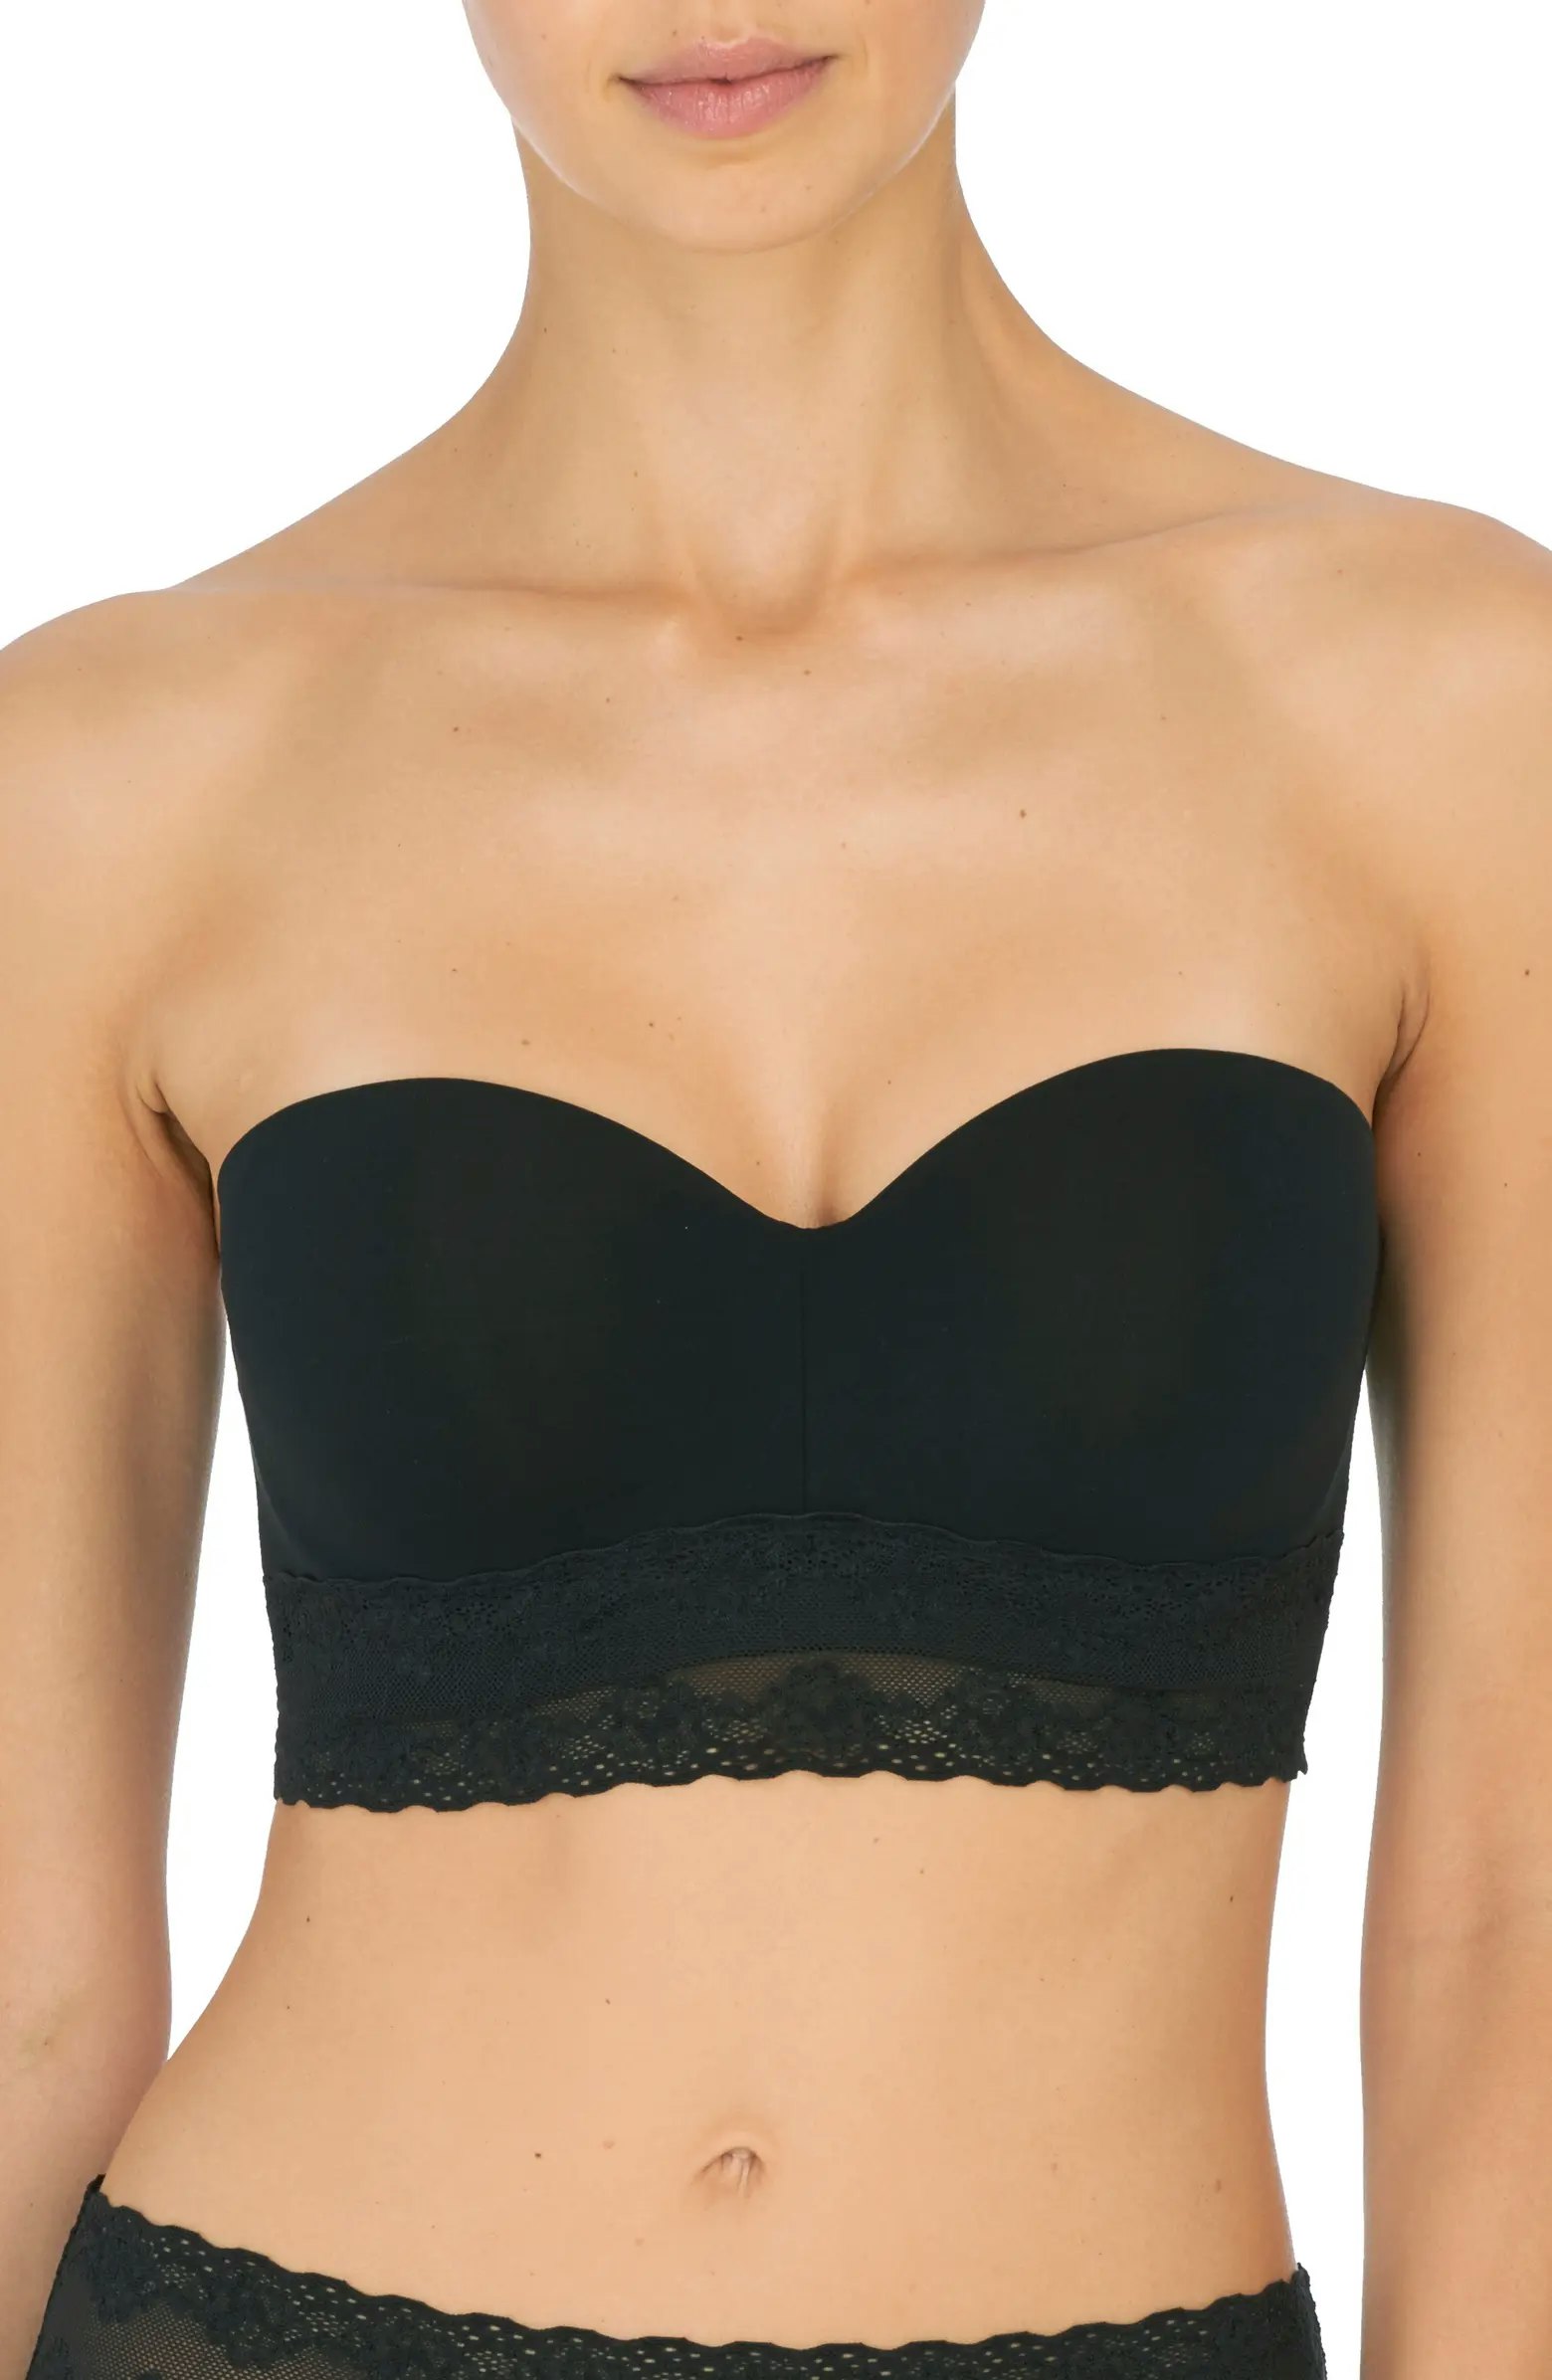 A Genius Trick for Keeping Your Strapless Bra in Place So it doesn